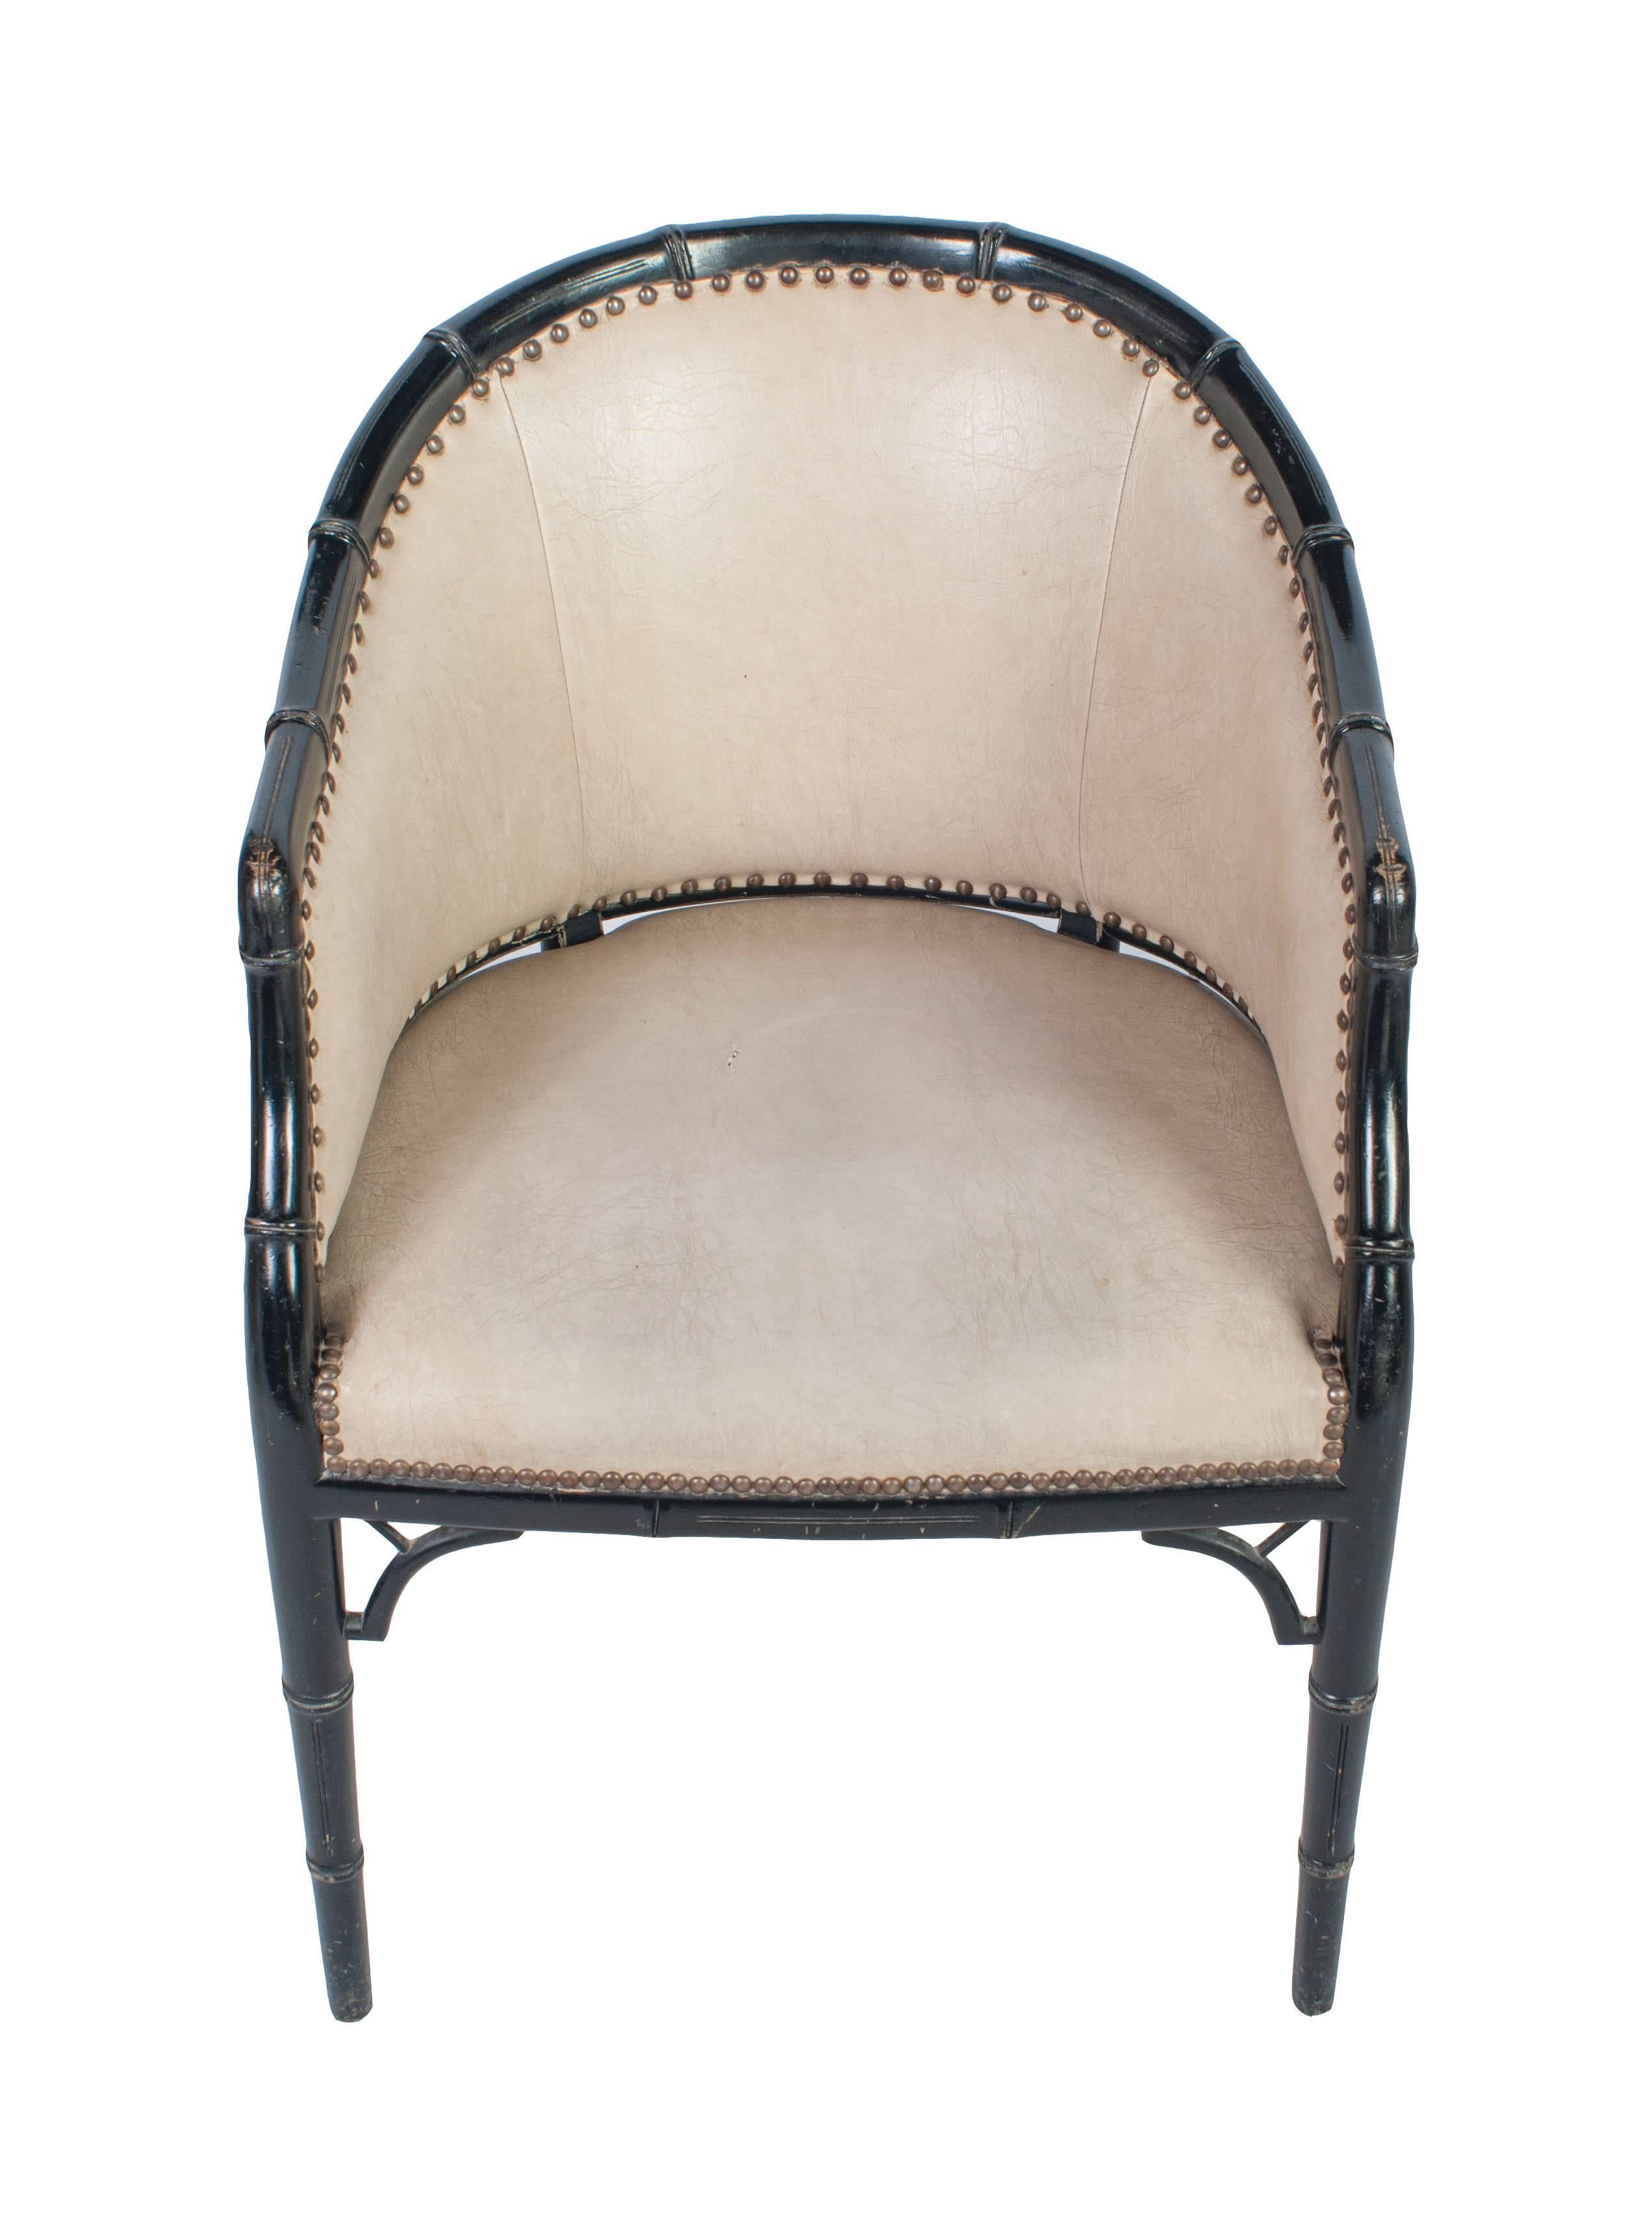 Black painted Bergere chair in a faux bamboo frame and faux leather upholstery.